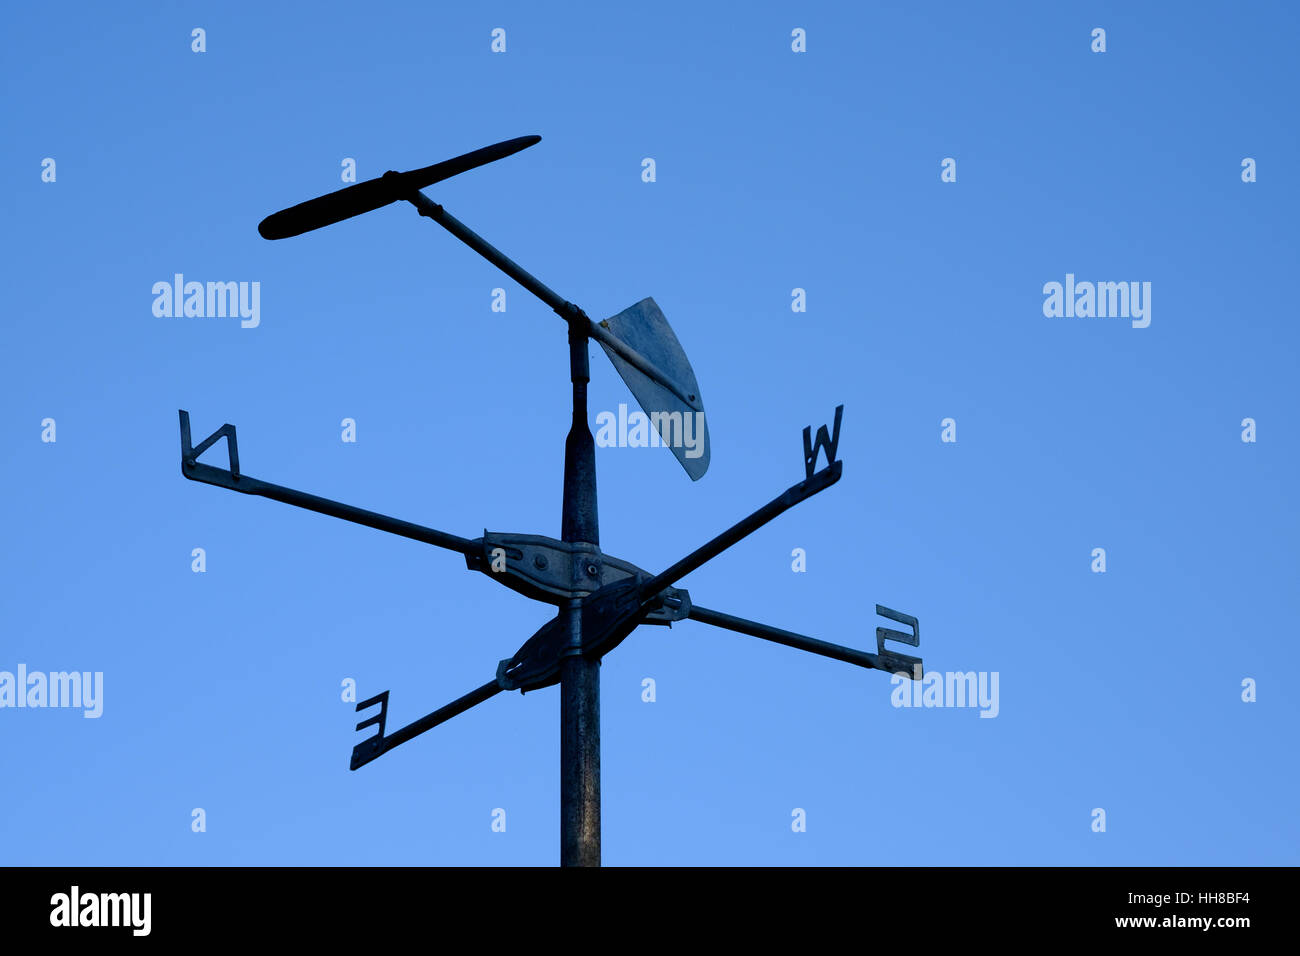 Rustic weather vane, partial silhouette, against a clear blue sky, showing  wind direction of north by north west Stock Photo - Alamy